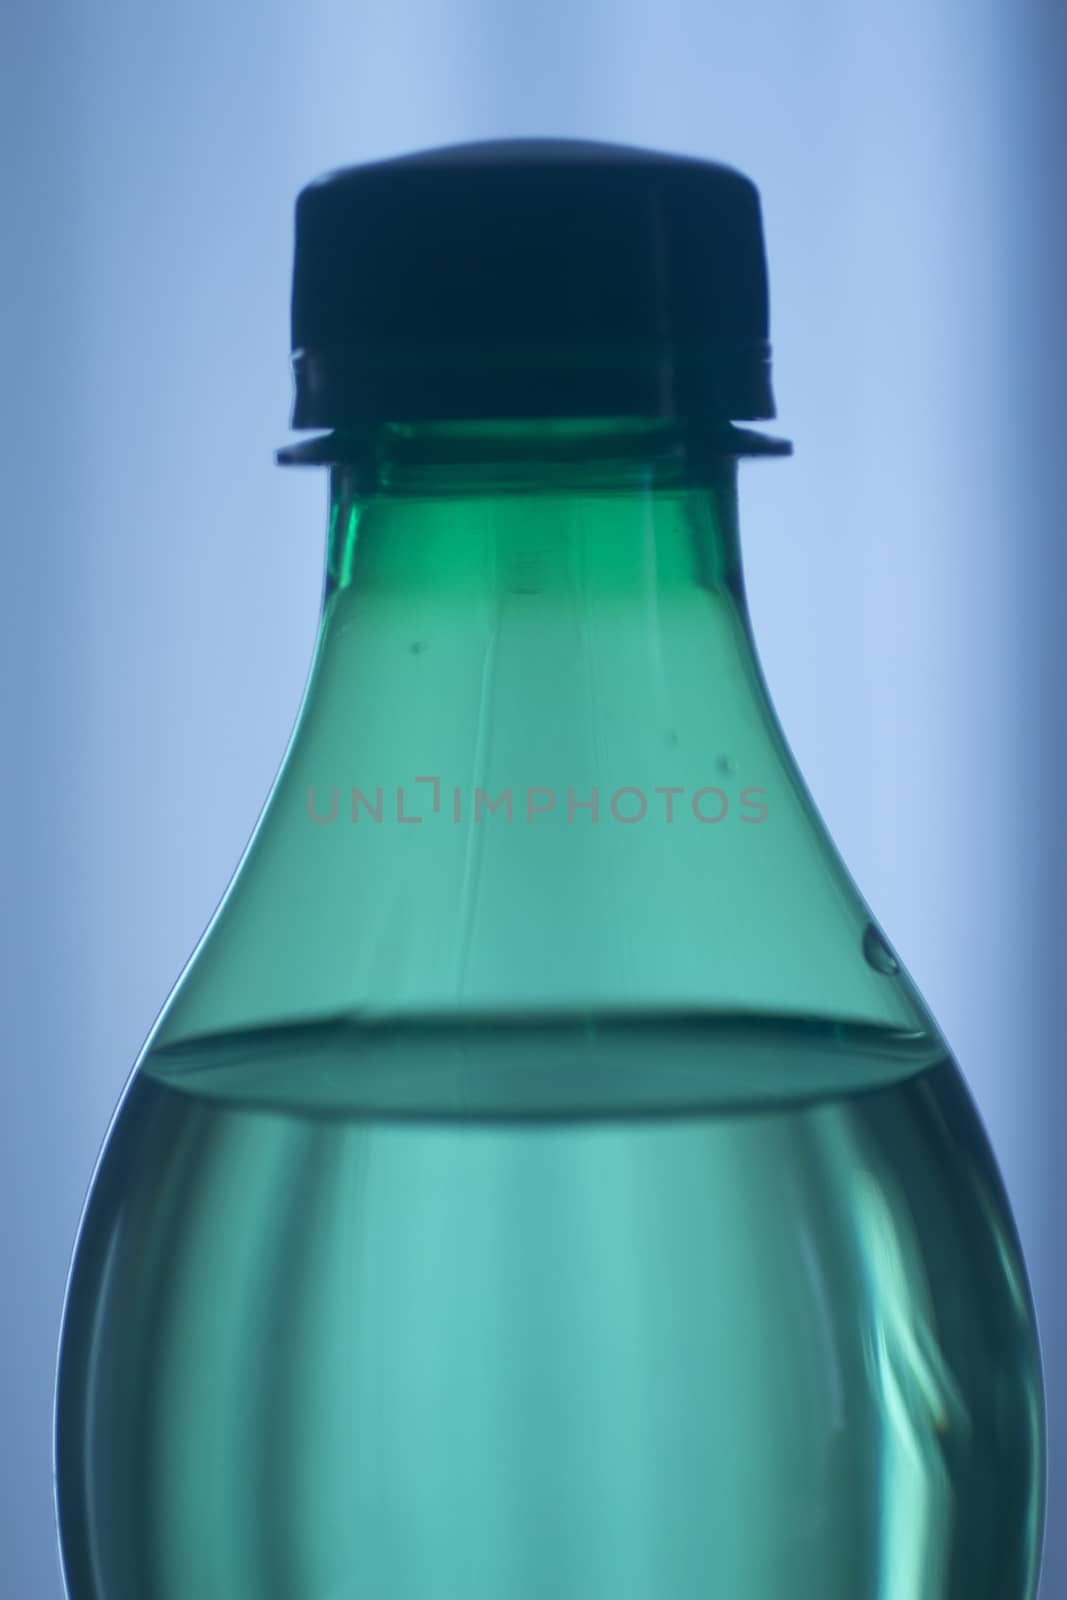 Isolated plastic water bottle on a plain blue studio background close-up photo.